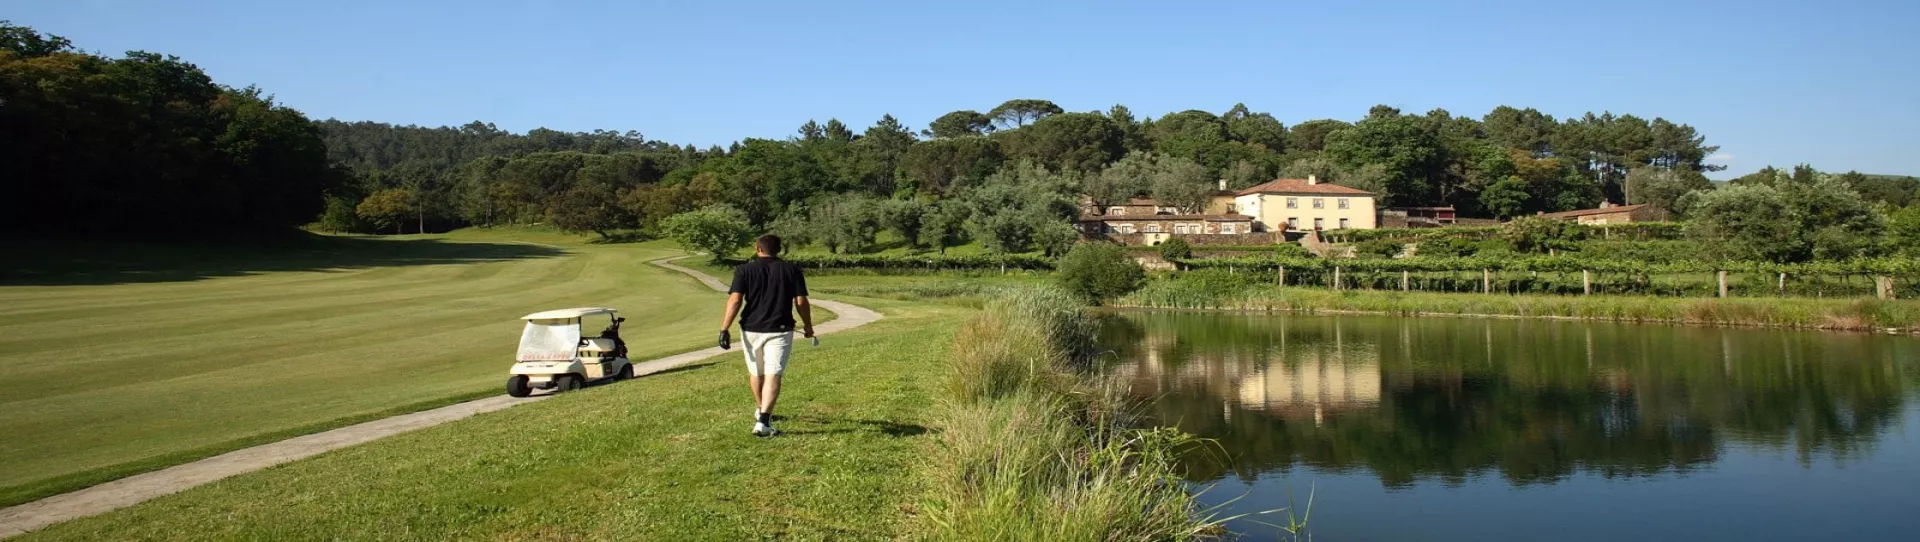 Portugal golf holidays - 28 Nights BB & 14 Days Unlimited Golf Rounds <b>Long Stay</b> - Photo 1